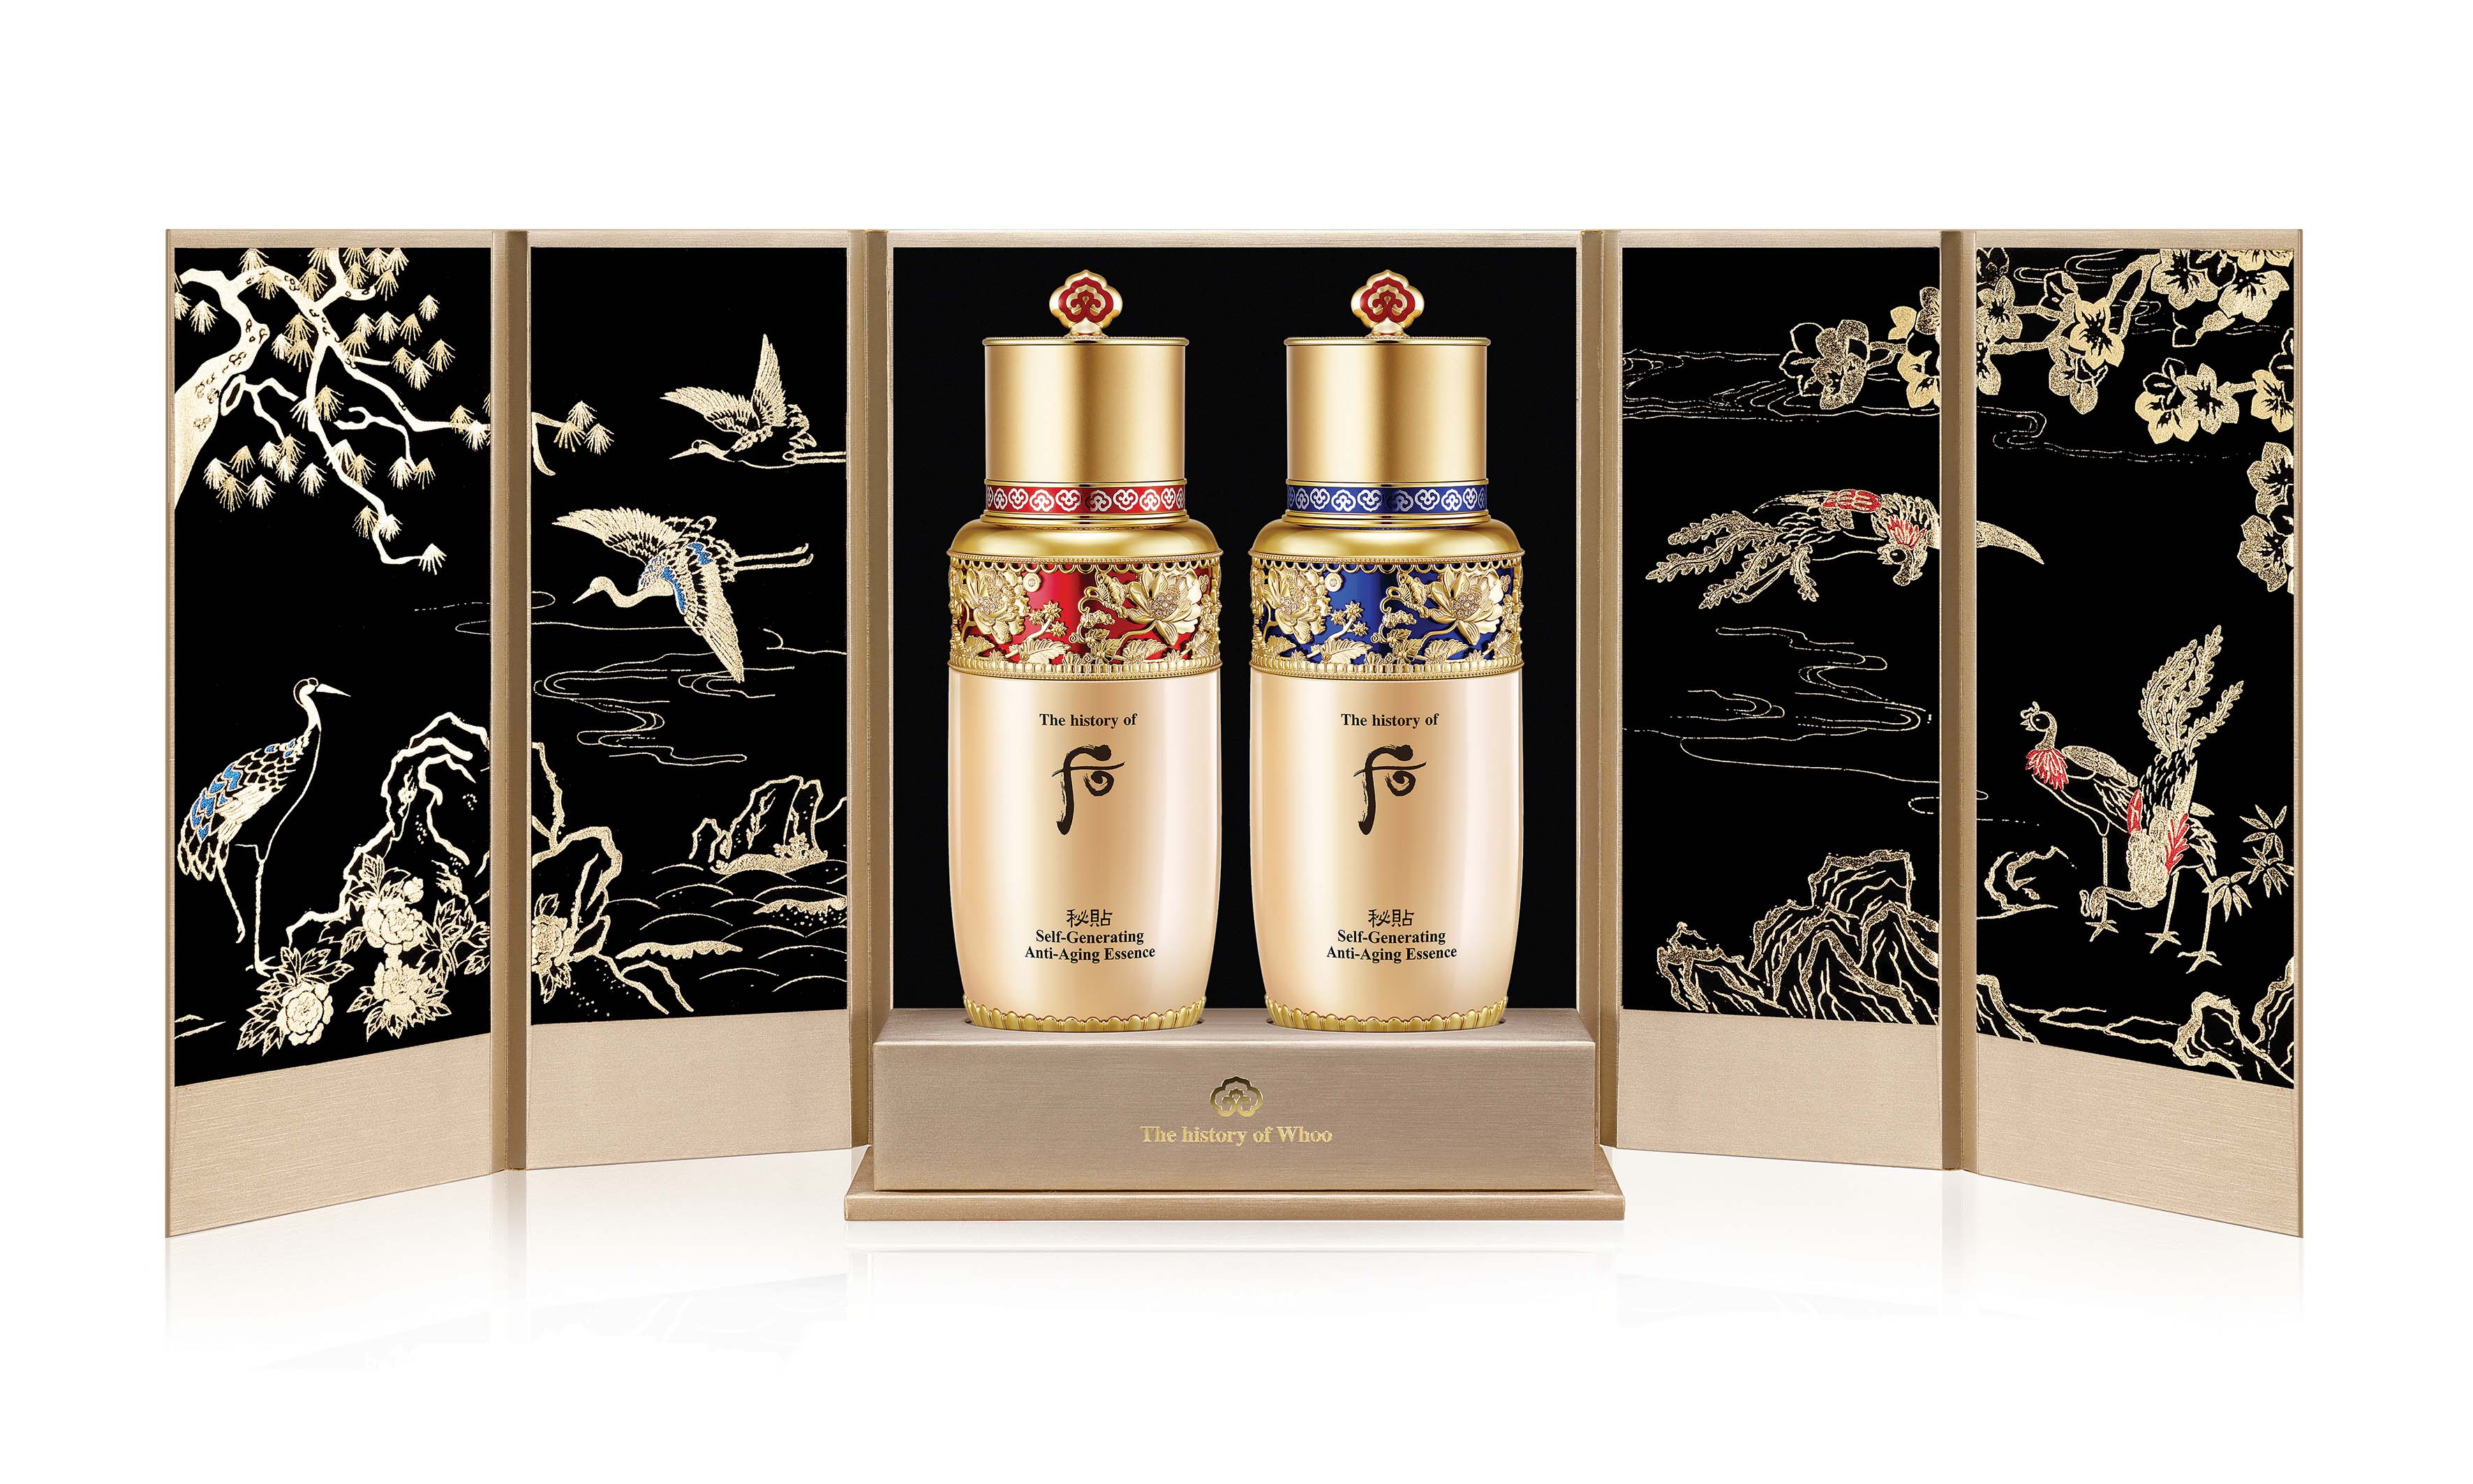 The history of Whoo 秘貼